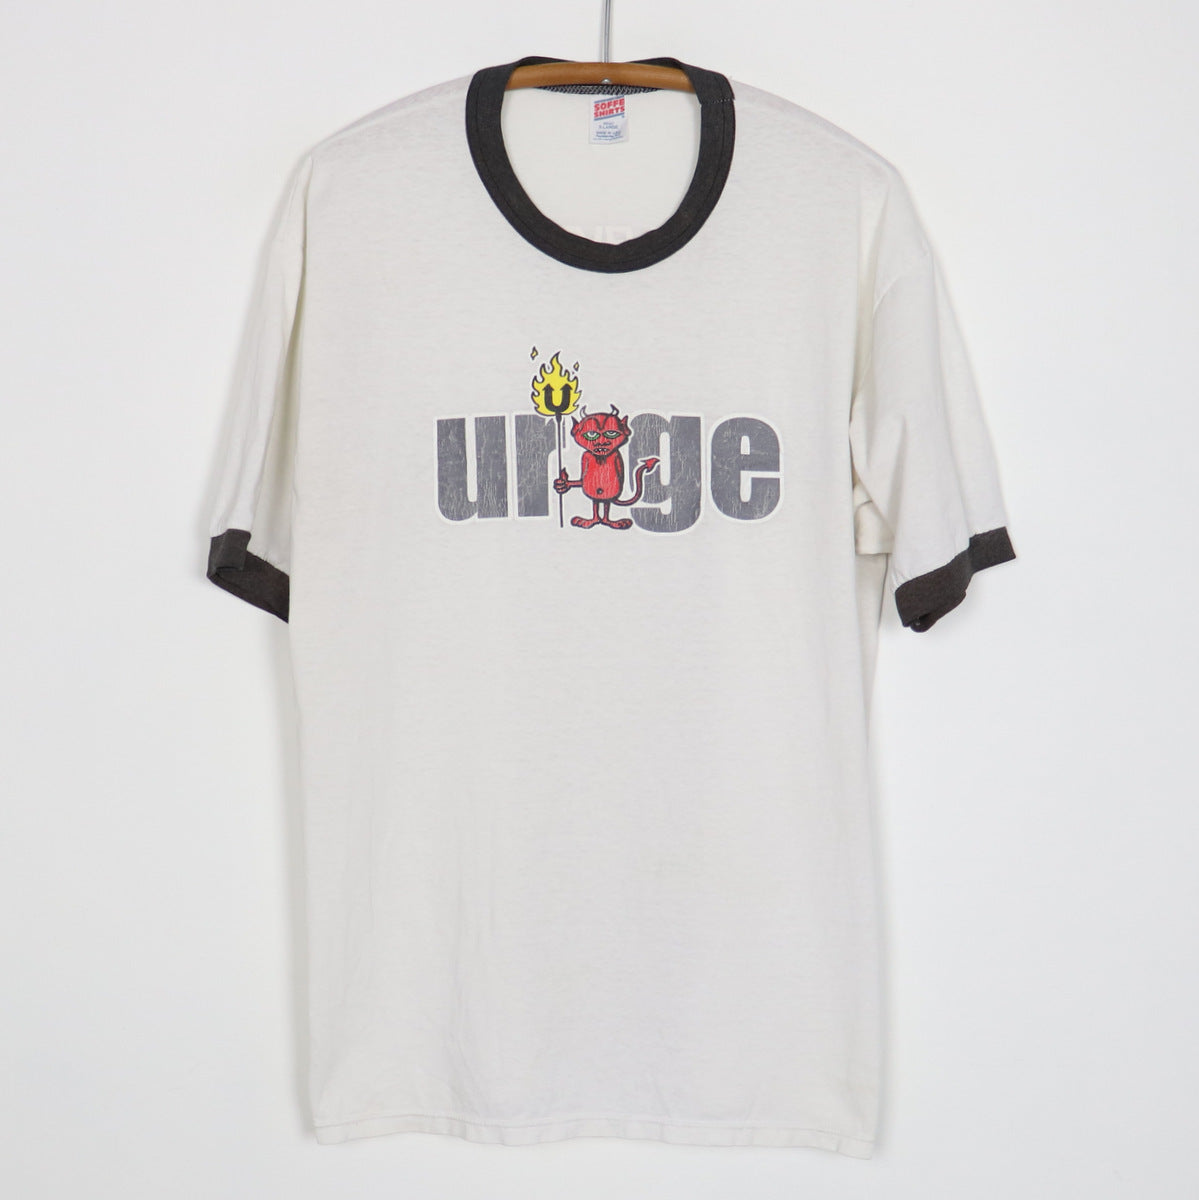 1996 The Urge Receiving The Gift Of Flavor Shirt – WyCo Vintage